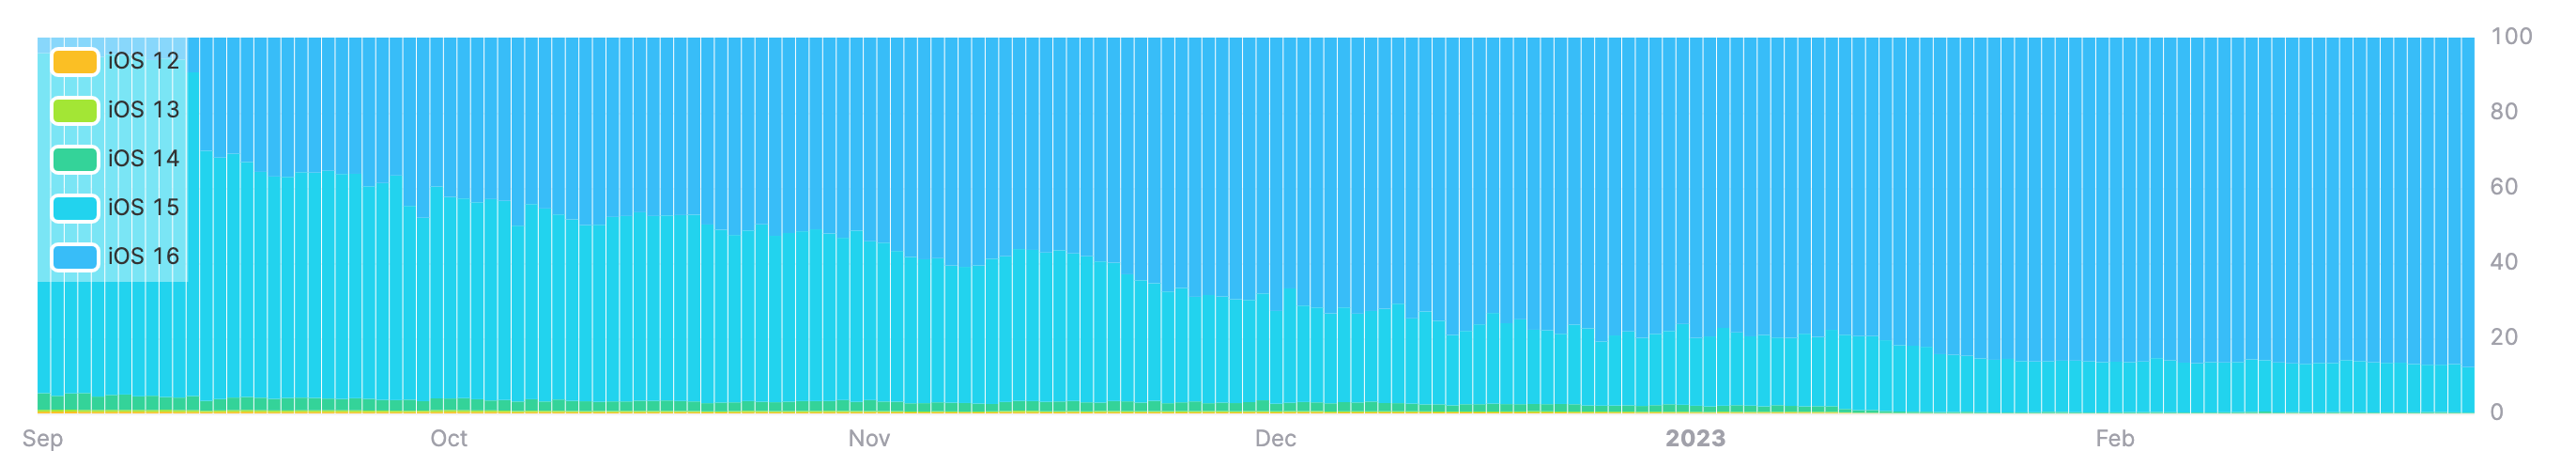 A chart of iOS Versions over time